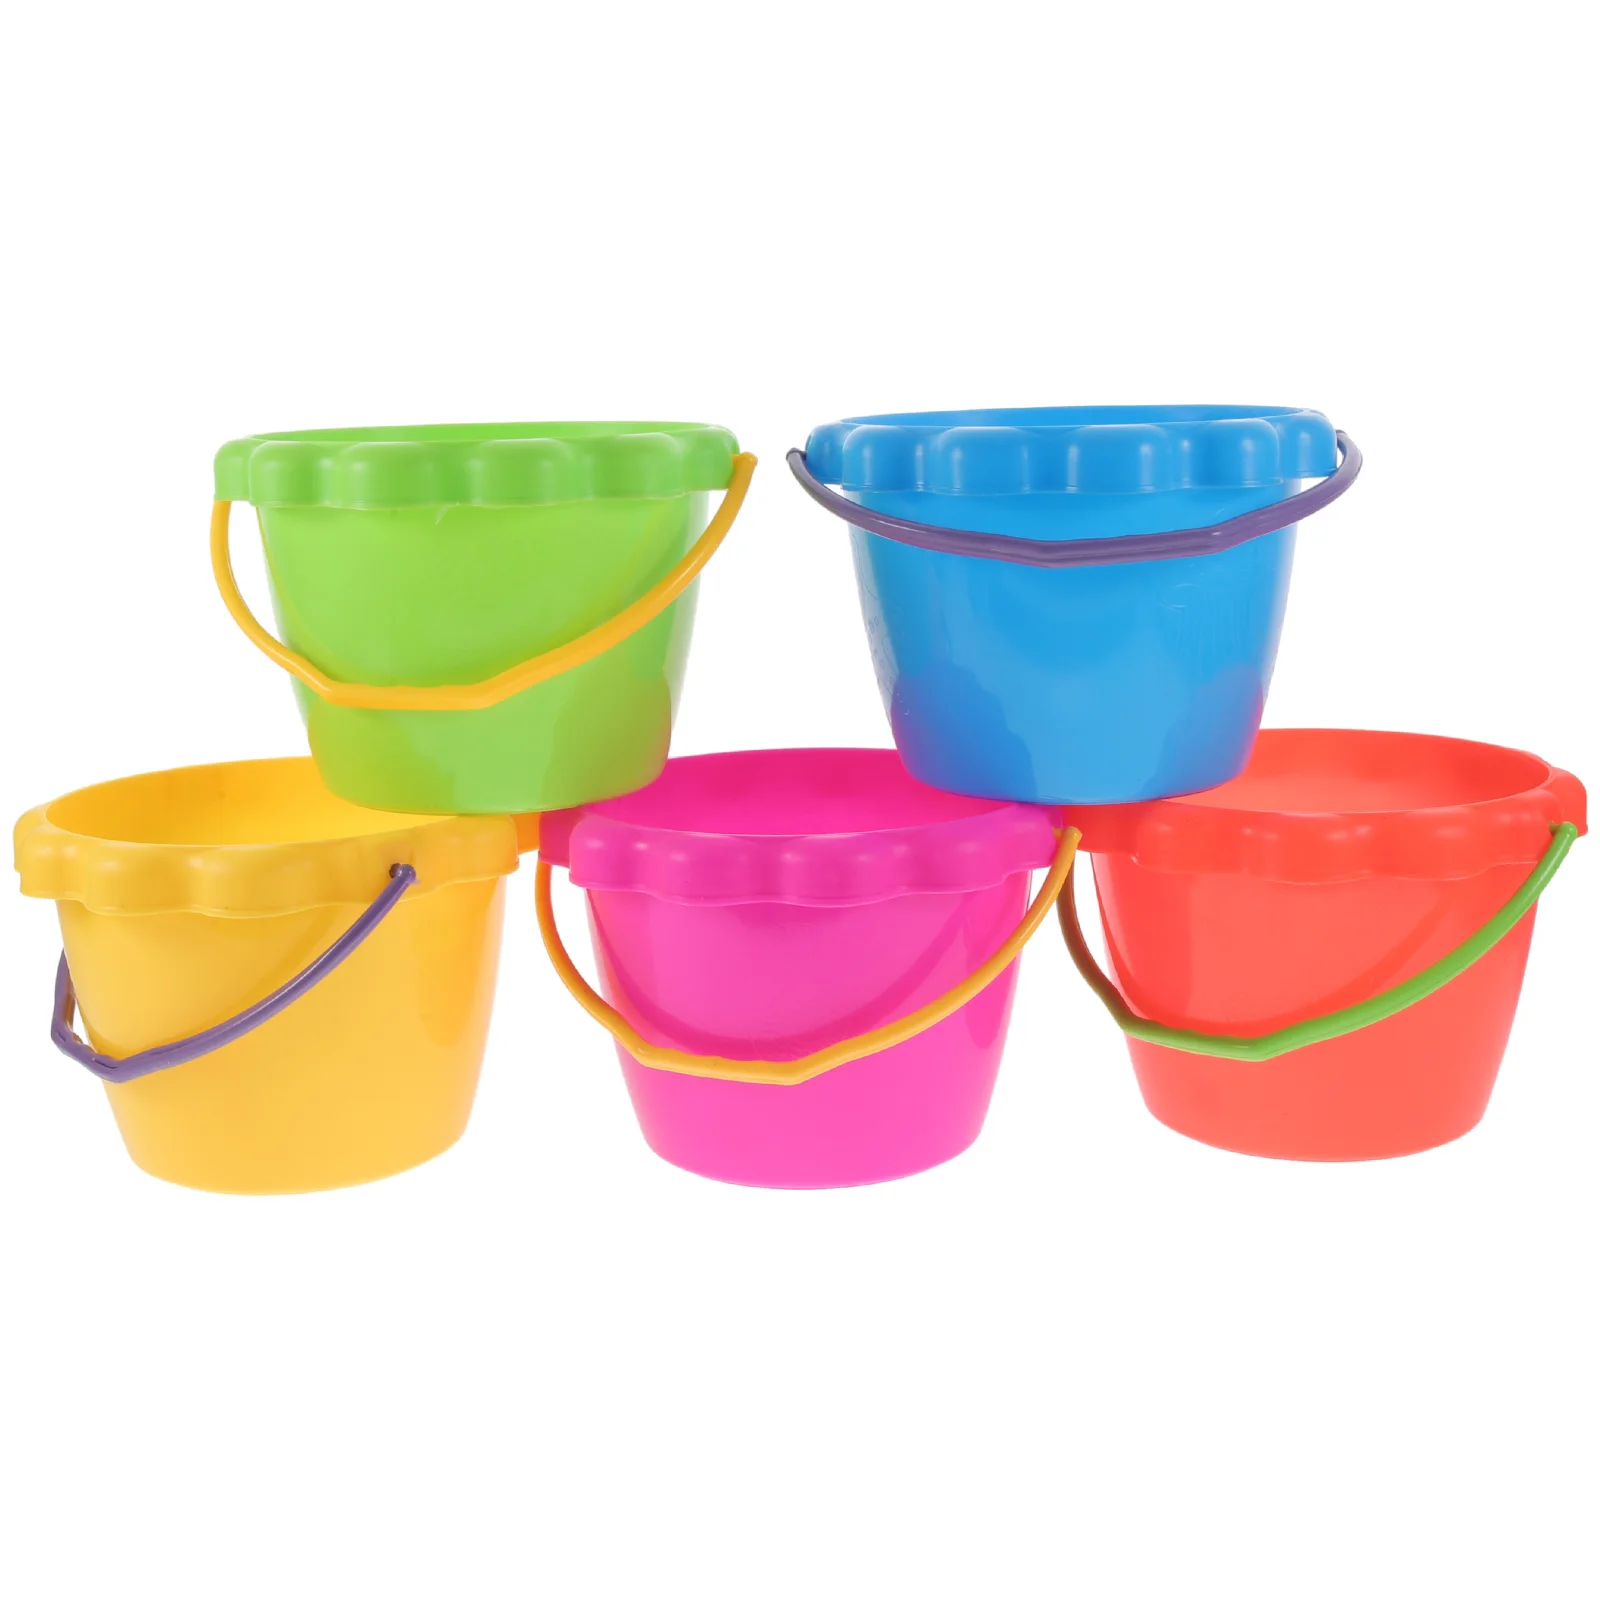 

5 Pcs Toy Beach Bucket Fishing Toys Bath Toddlers Plastic Sand Holders Playing Tools Kids Buckets Playthings